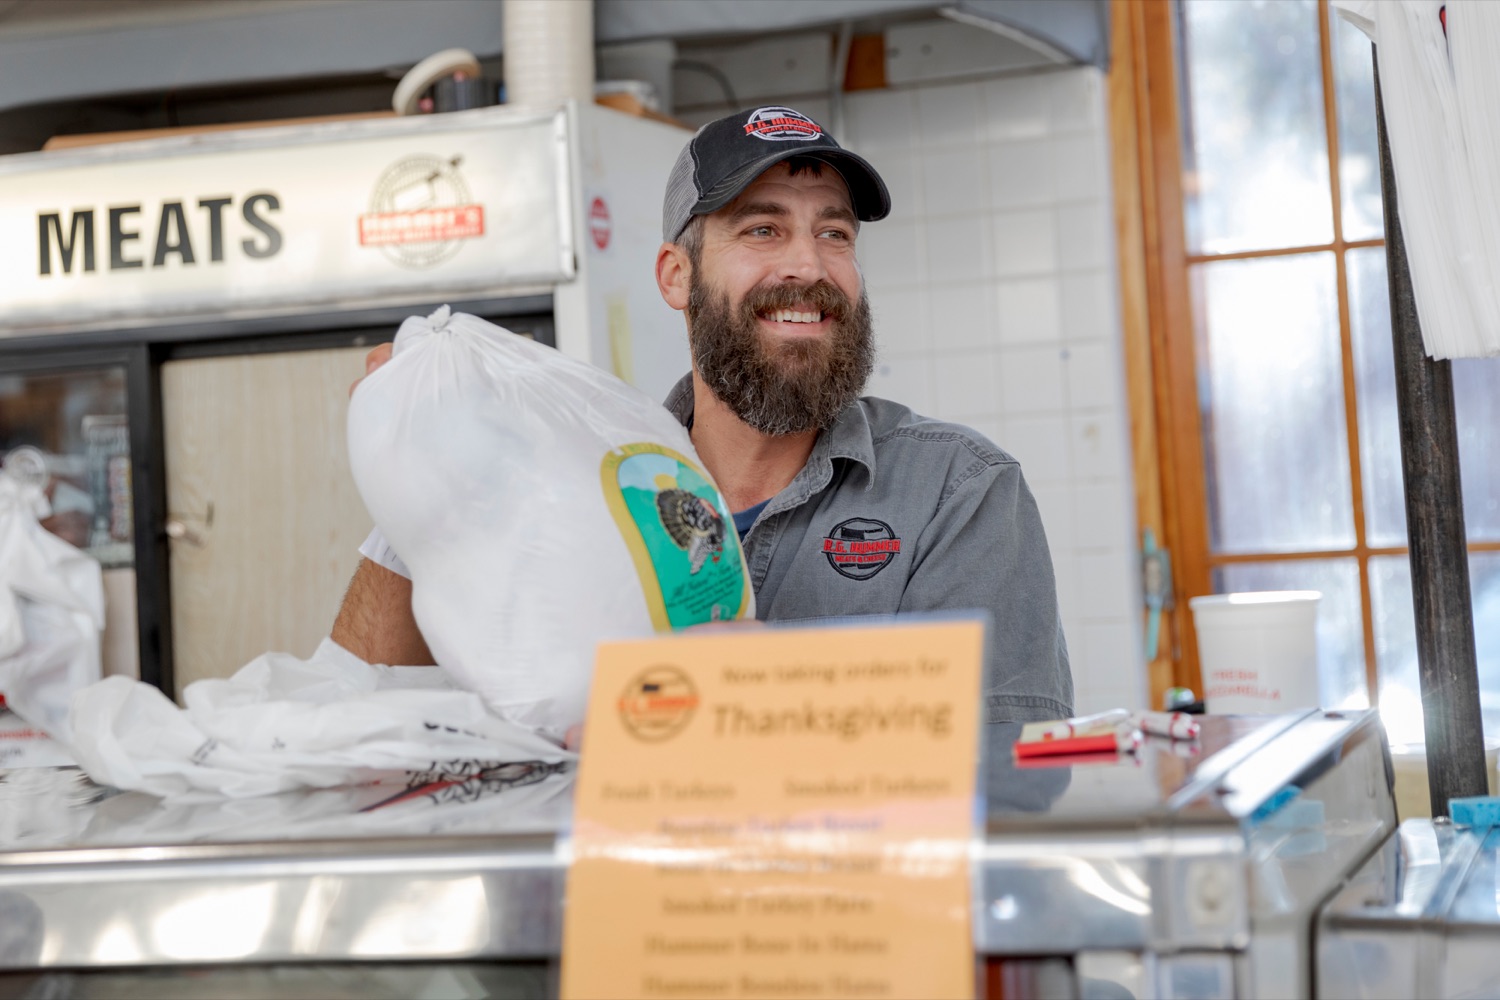 Ryan Hummer, owner of R.G. Hummer Meat & Cheese, inside Broad Street Market on Thursday, November 21, 2019.<br><a href="https://filesource.amperwave.net/commonwealthofpa/photo/17546_AGRIC_Buy_Local_NK_018.JPG" target="_blank">⇣ Download Photo</a>